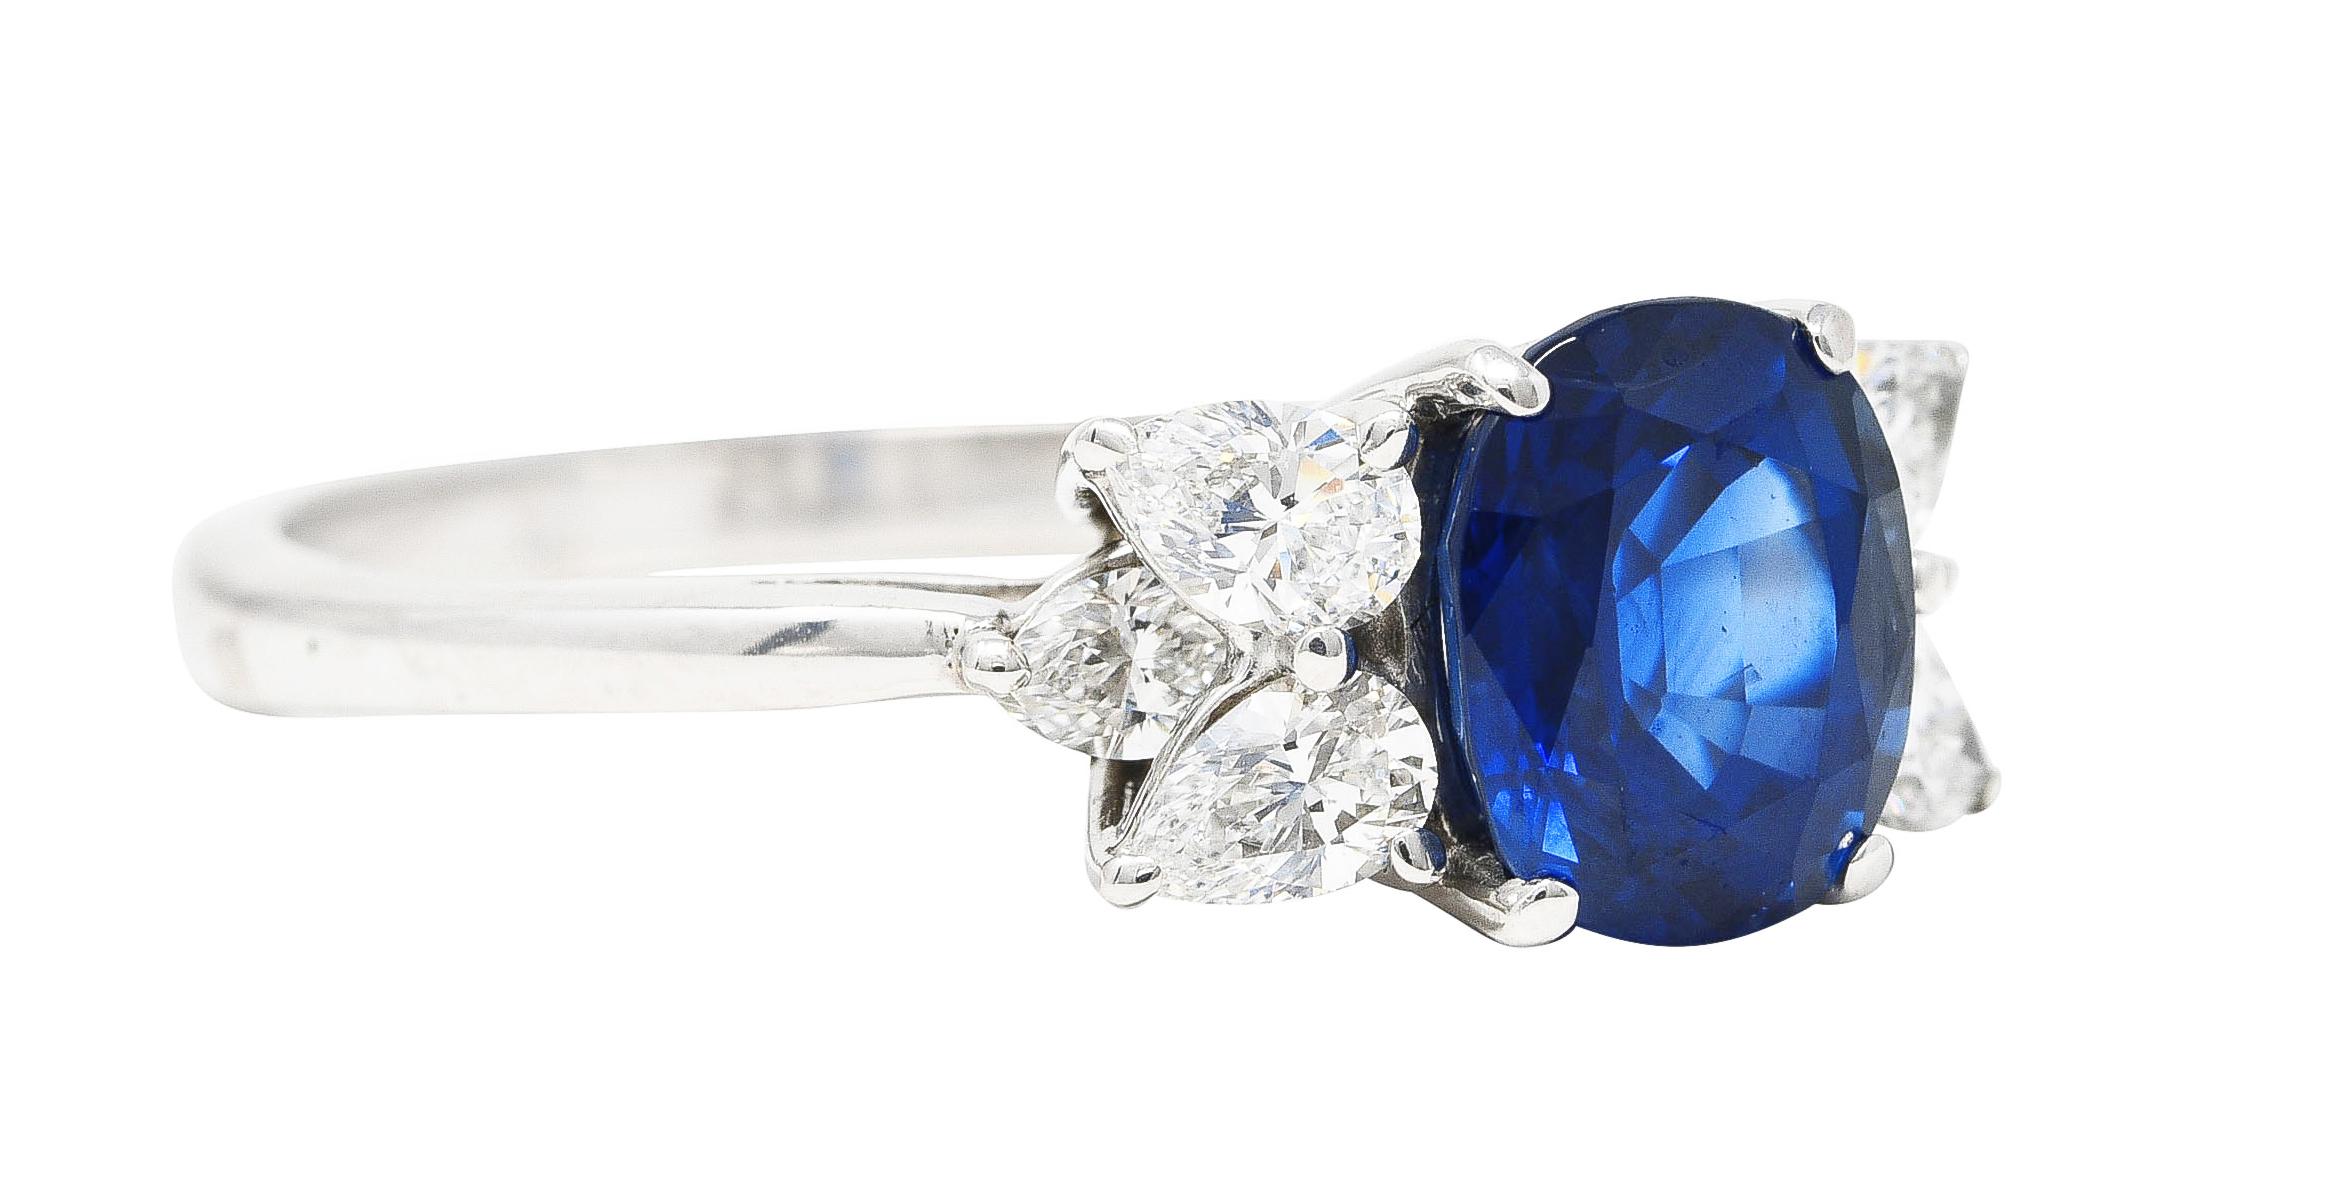 Centering an oval cut sapphire weighing approximately 2.60 carats total - transparent medium to deep  blue in color. Prong set and flanked by pear and marquise cut diamonds prong set in tiered cathedral shoulders. Weighing approximately 0.74 carat